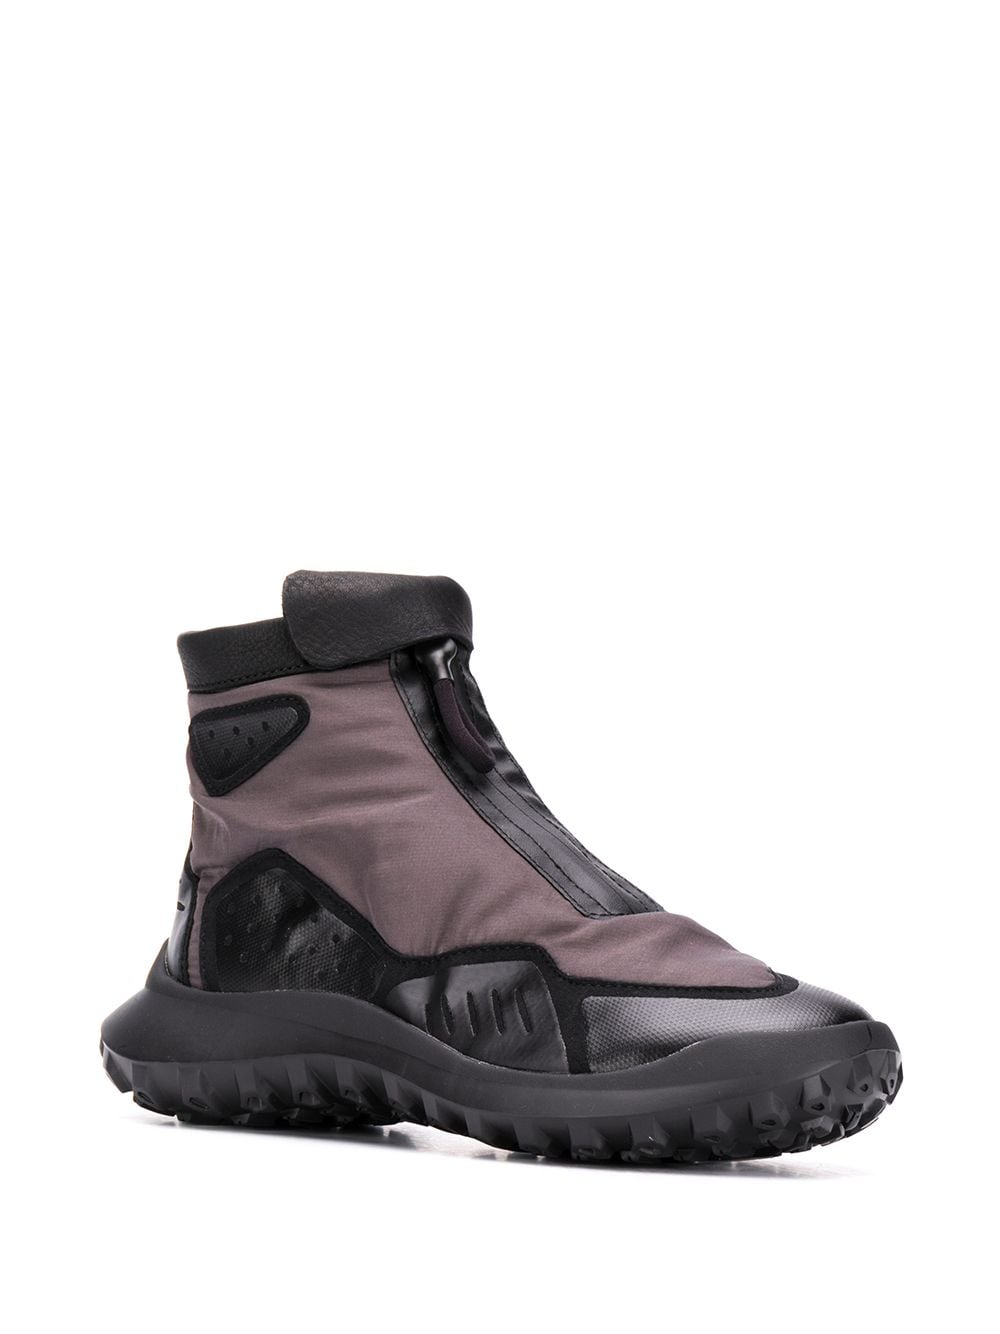 Shop Camper panelled zip-up boots with Express Delivery - FARFETCH